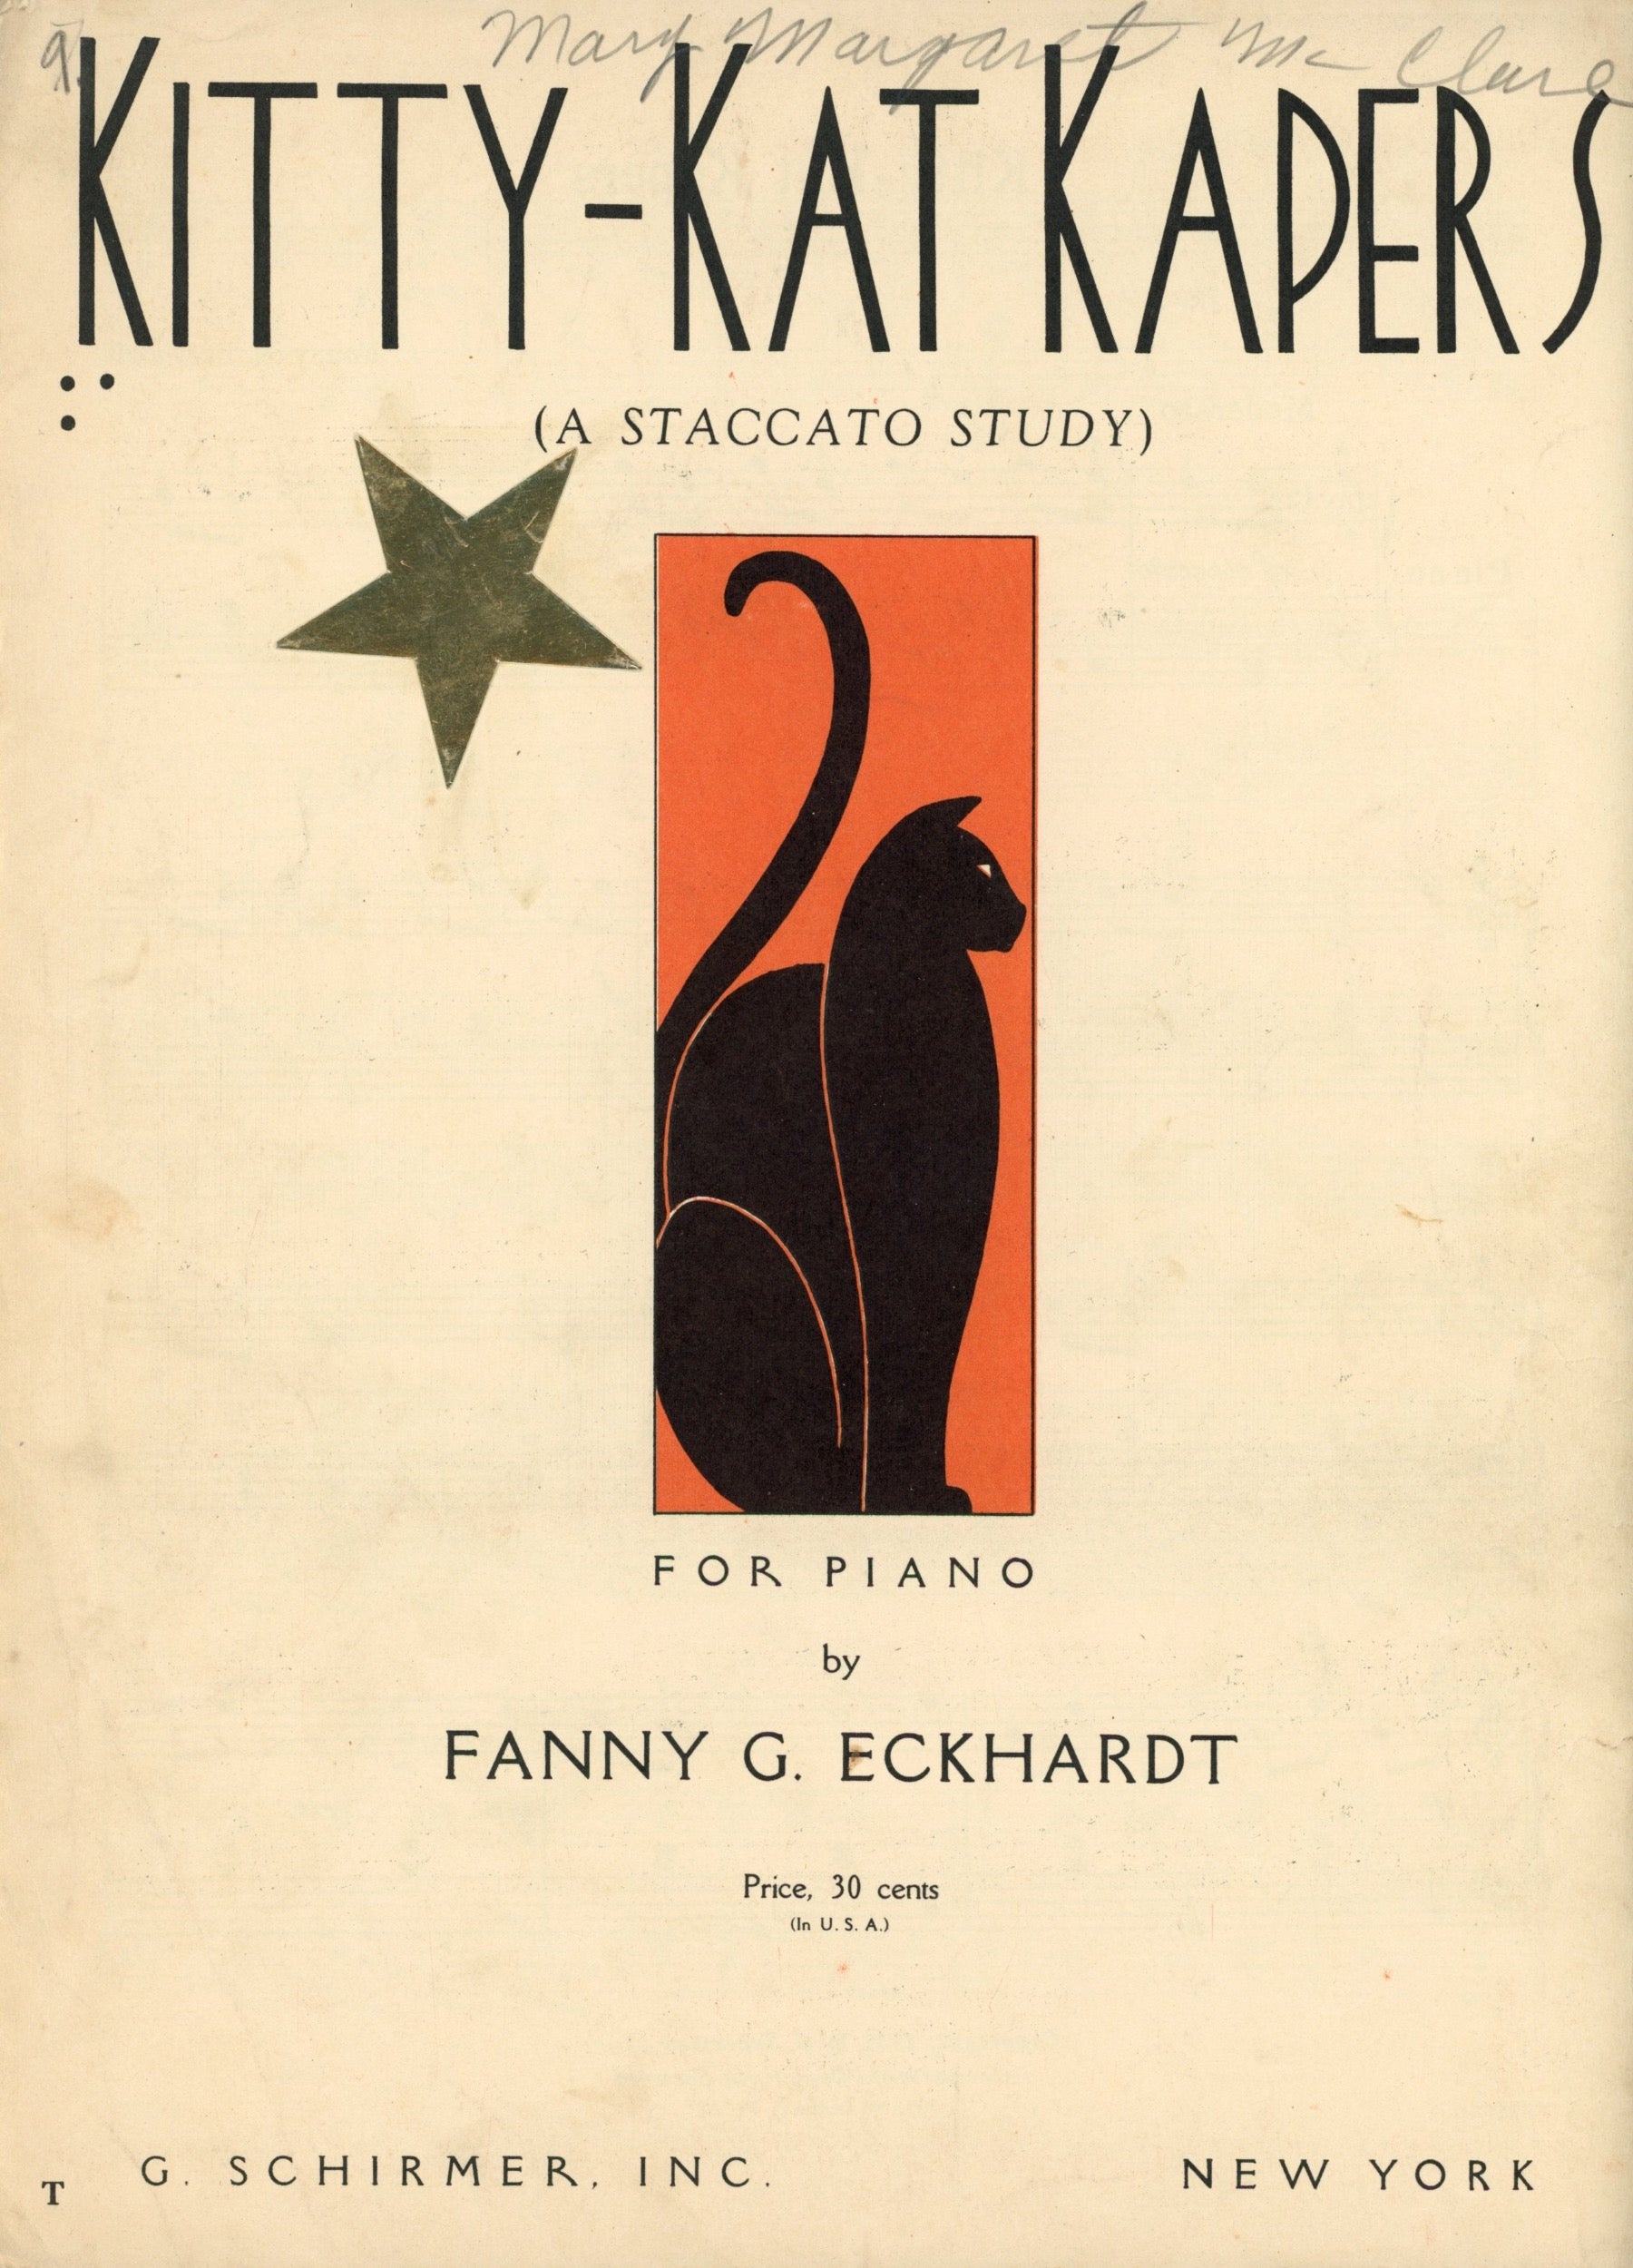 KITTY-KAT KAPERS for Piano Vintage Sheet Music by Fanny G. Eckhardt ©1937